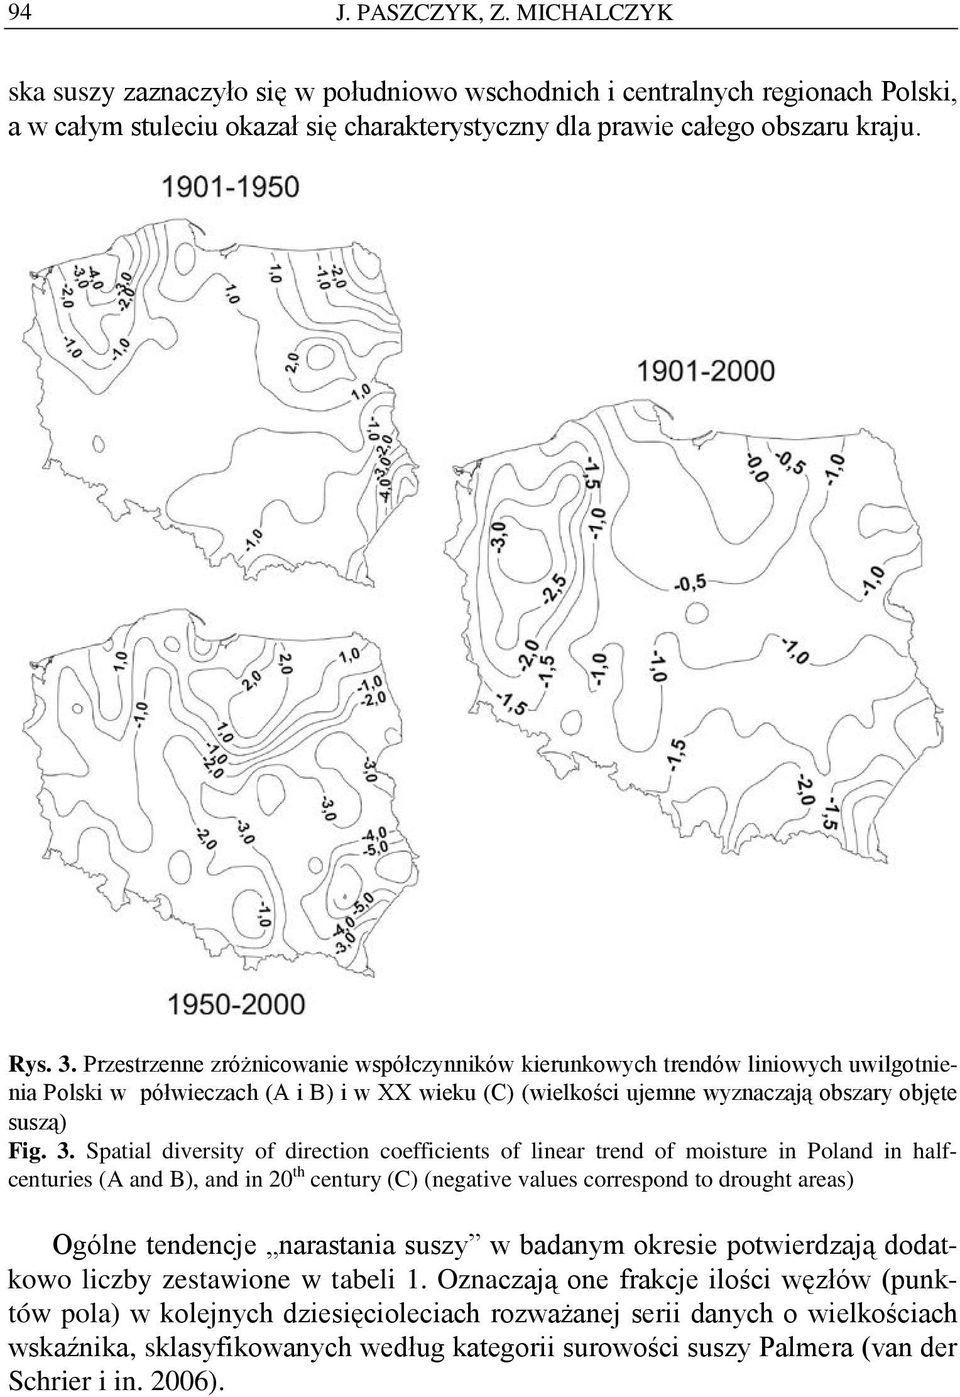 Spatal dversty of drecton coeffcents of lnear trend of mosture n Poland n halfcentures (A and B), and n 20 th century (C) (negatve values correspond to drought areas) Ogólne tendencje narastana suszy